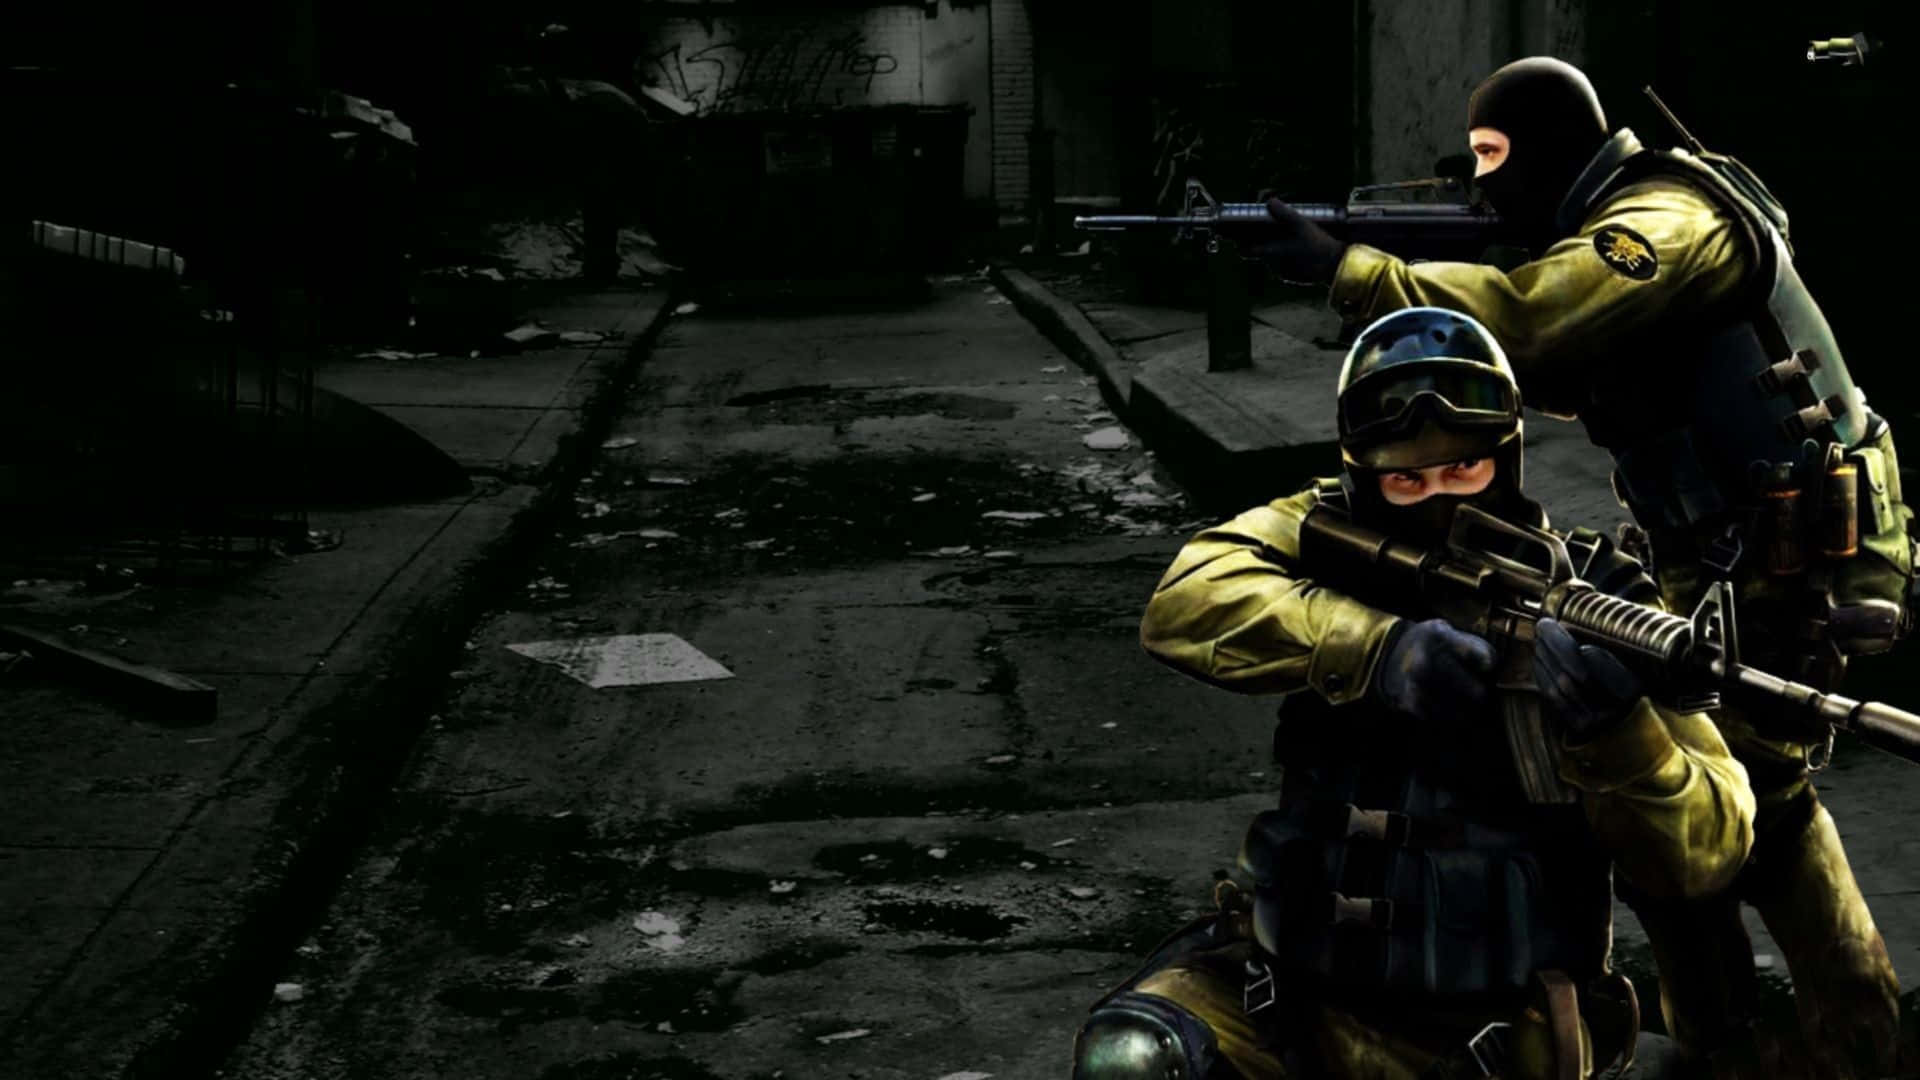 Get Ready to Take Counter-Strike Global Offensive by Storm